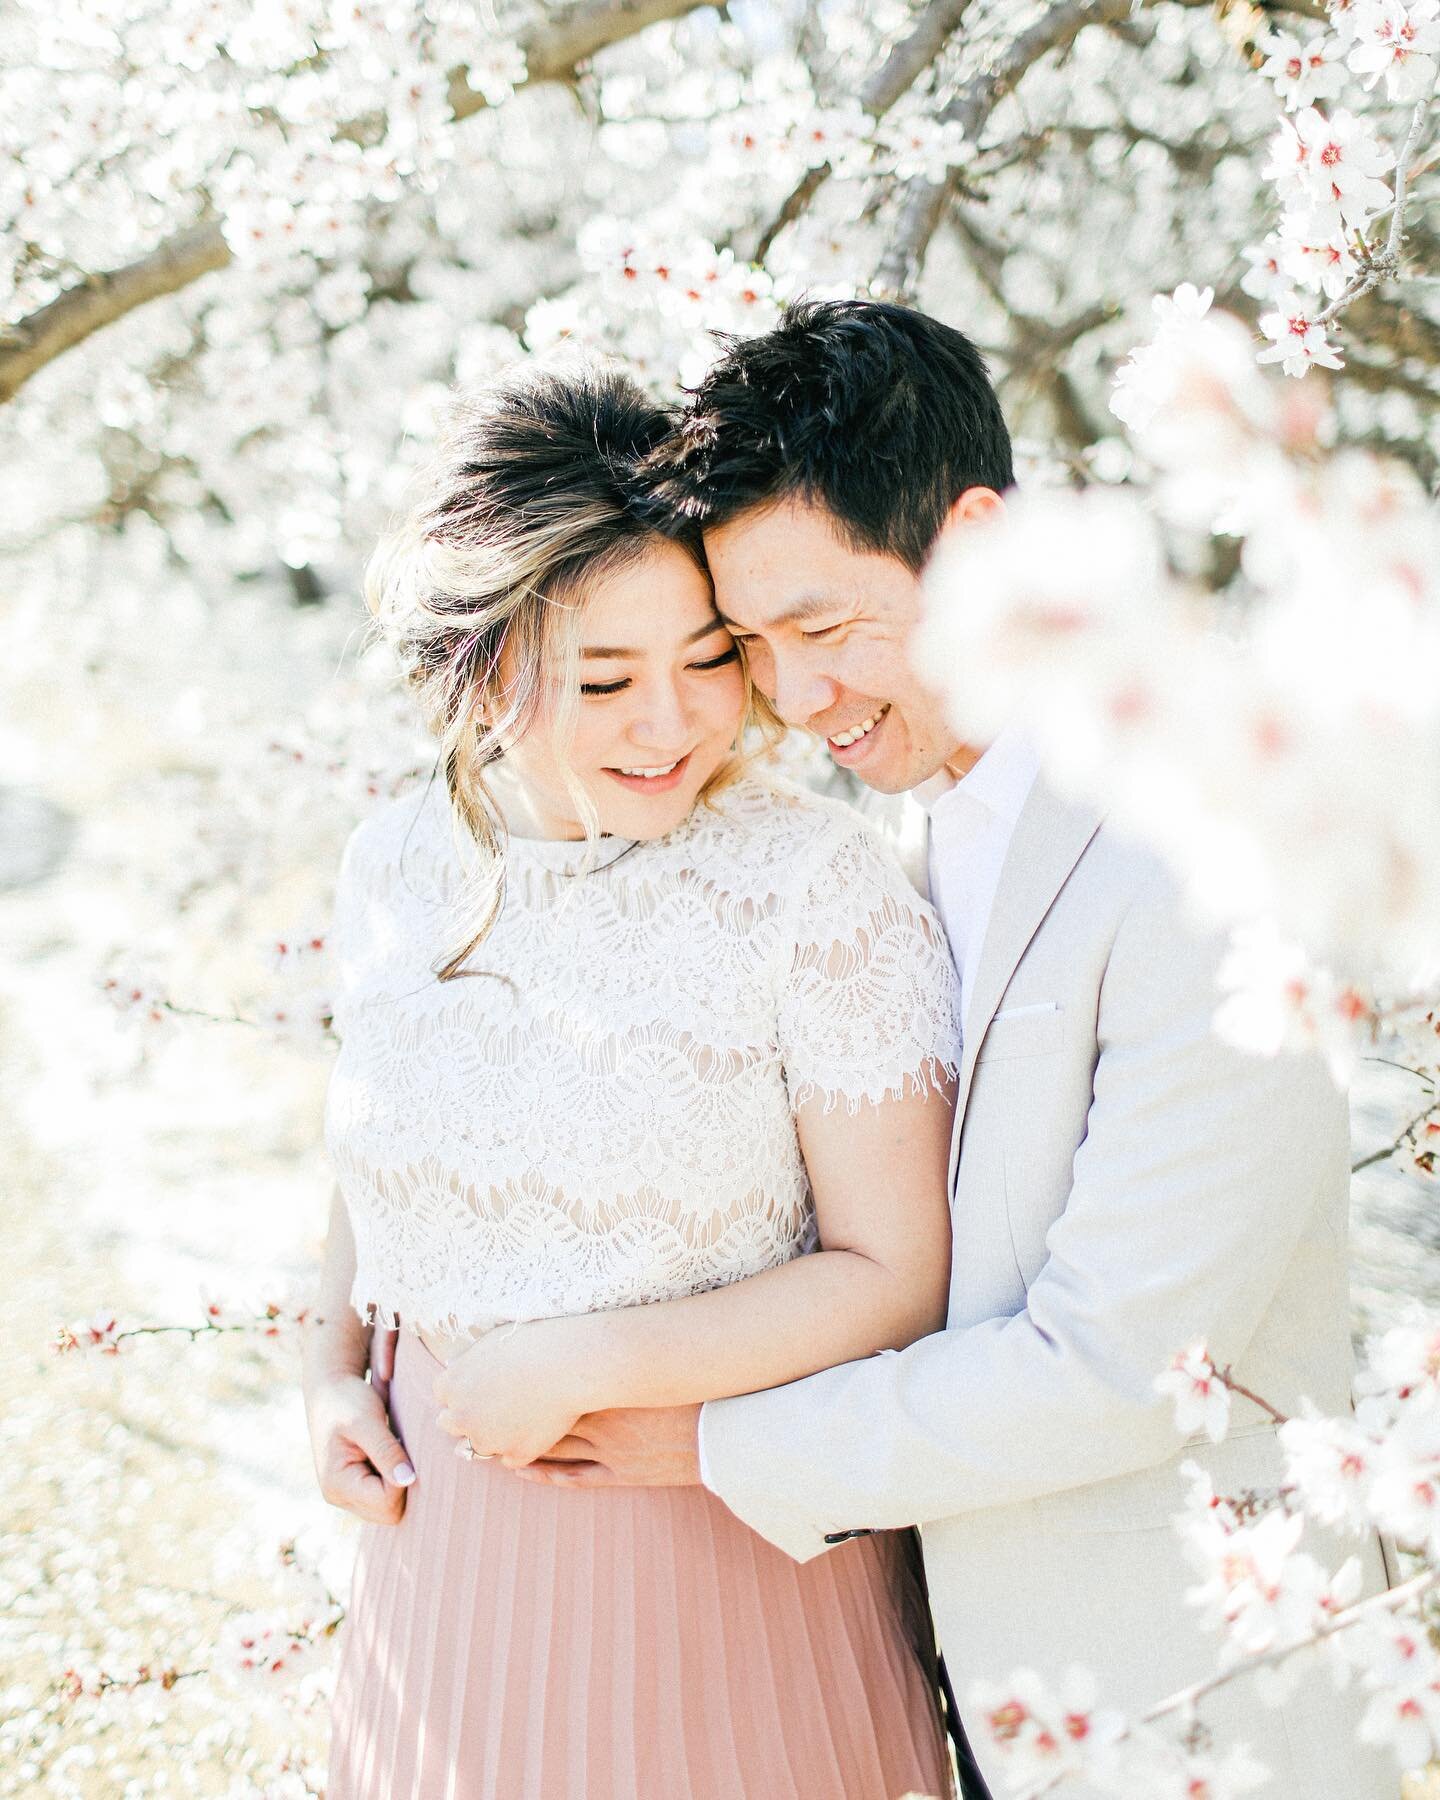 Last weekend I went out of town for the first time in a year and for such an exciting reason! Photographed a few sessions among the almond blossoms and it was pure joy. Thank you so much to the wonderful couples &amp; families who came out and especi